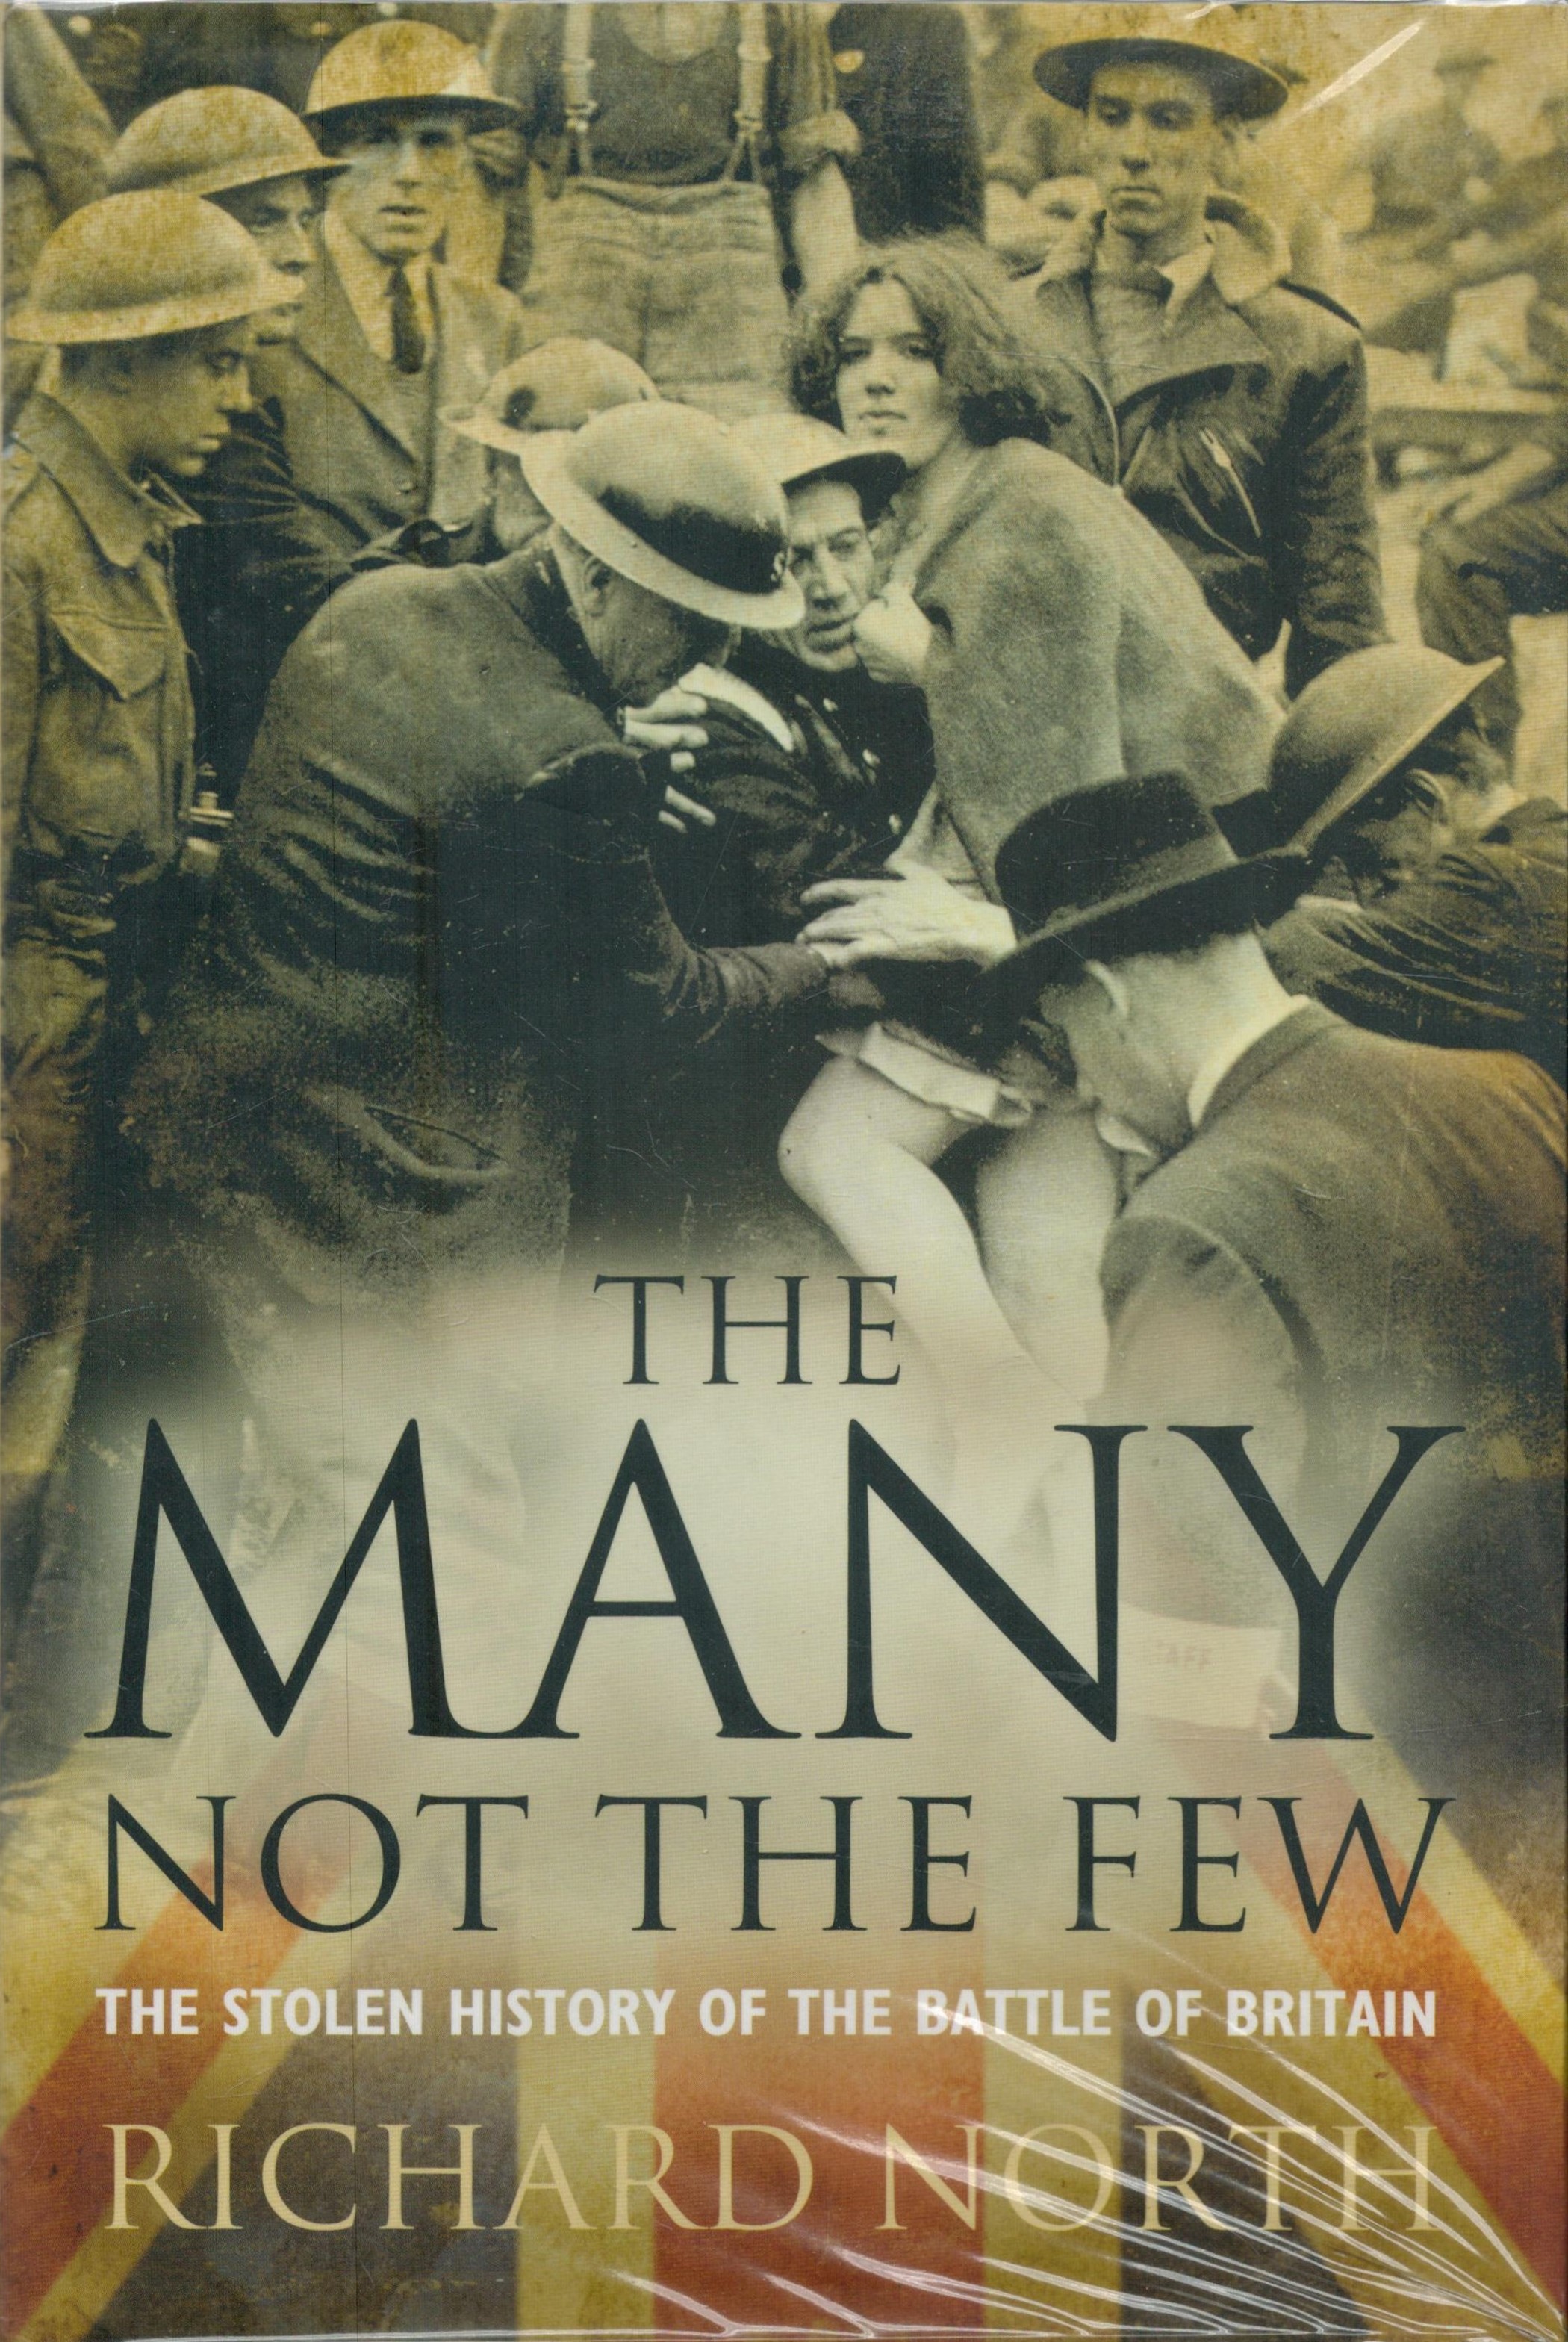 The Many Not the Few - The Stolen History of the Battle of Britain by Richard North 2012 Hardback - Image 3 of 9